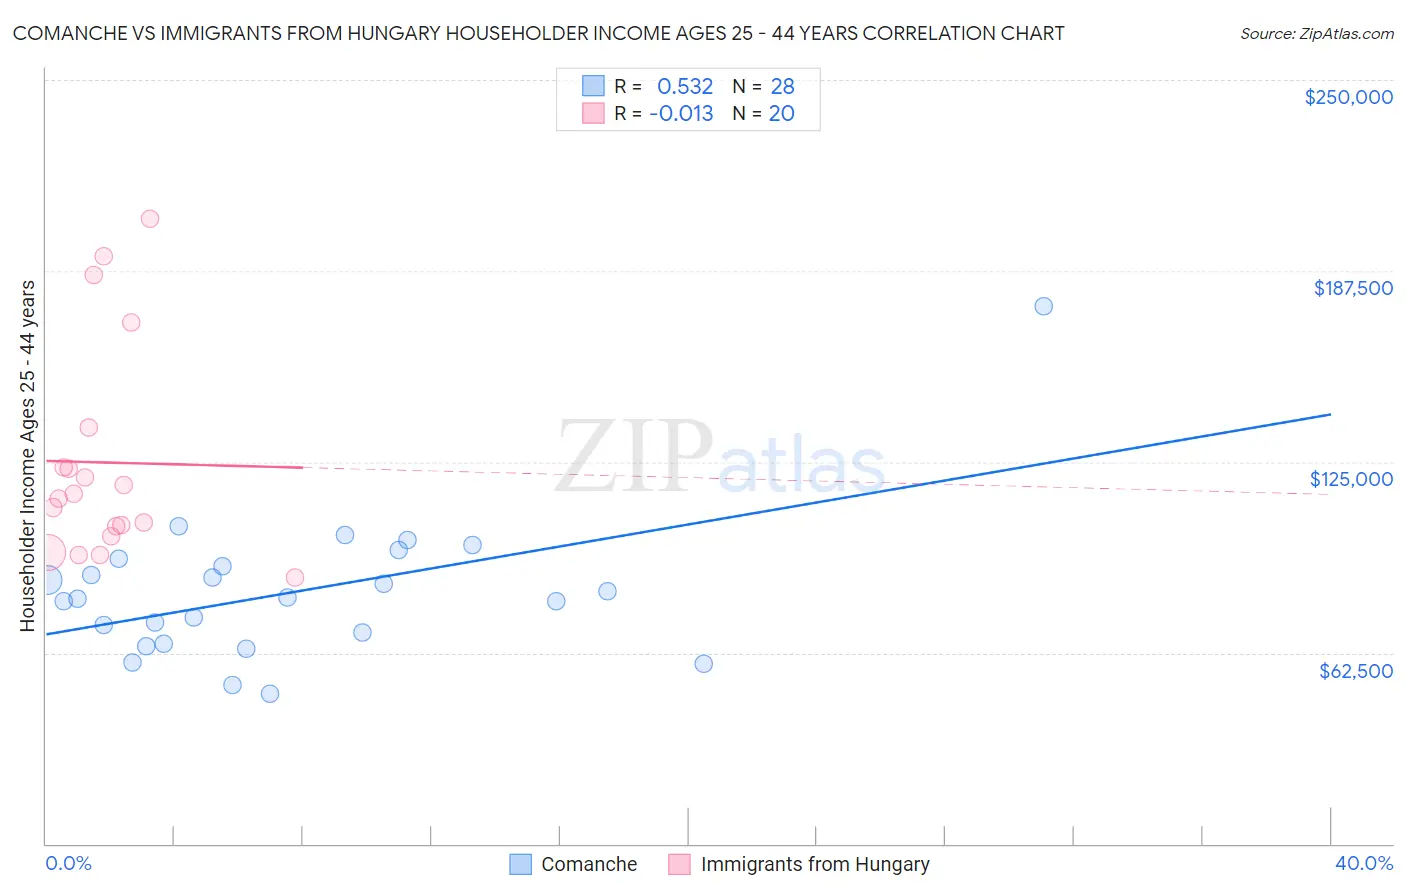 Comanche vs Immigrants from Hungary Householder Income Ages 25 - 44 years